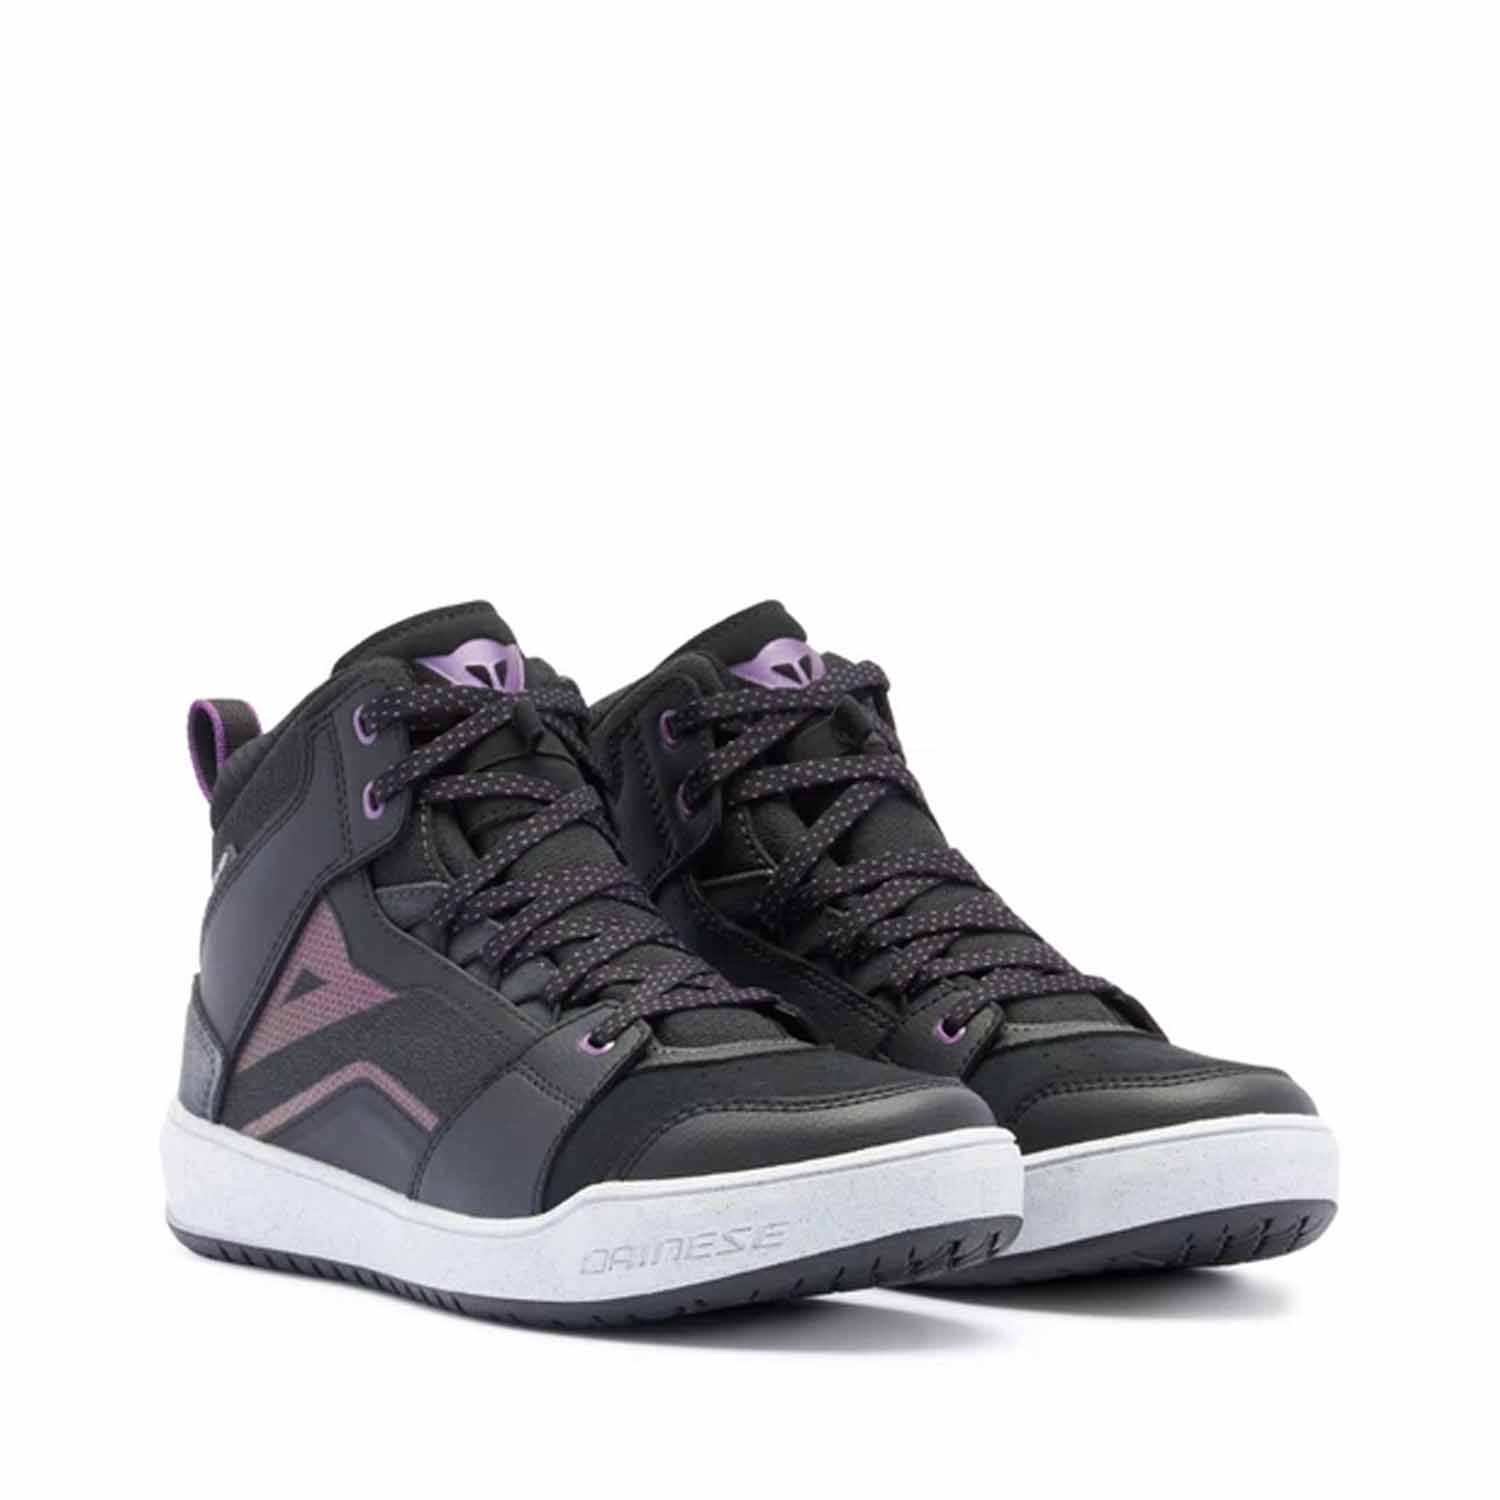 Image of Dainese Suburb D-WP Shoes WMN Black White Metal Purple Talla 38